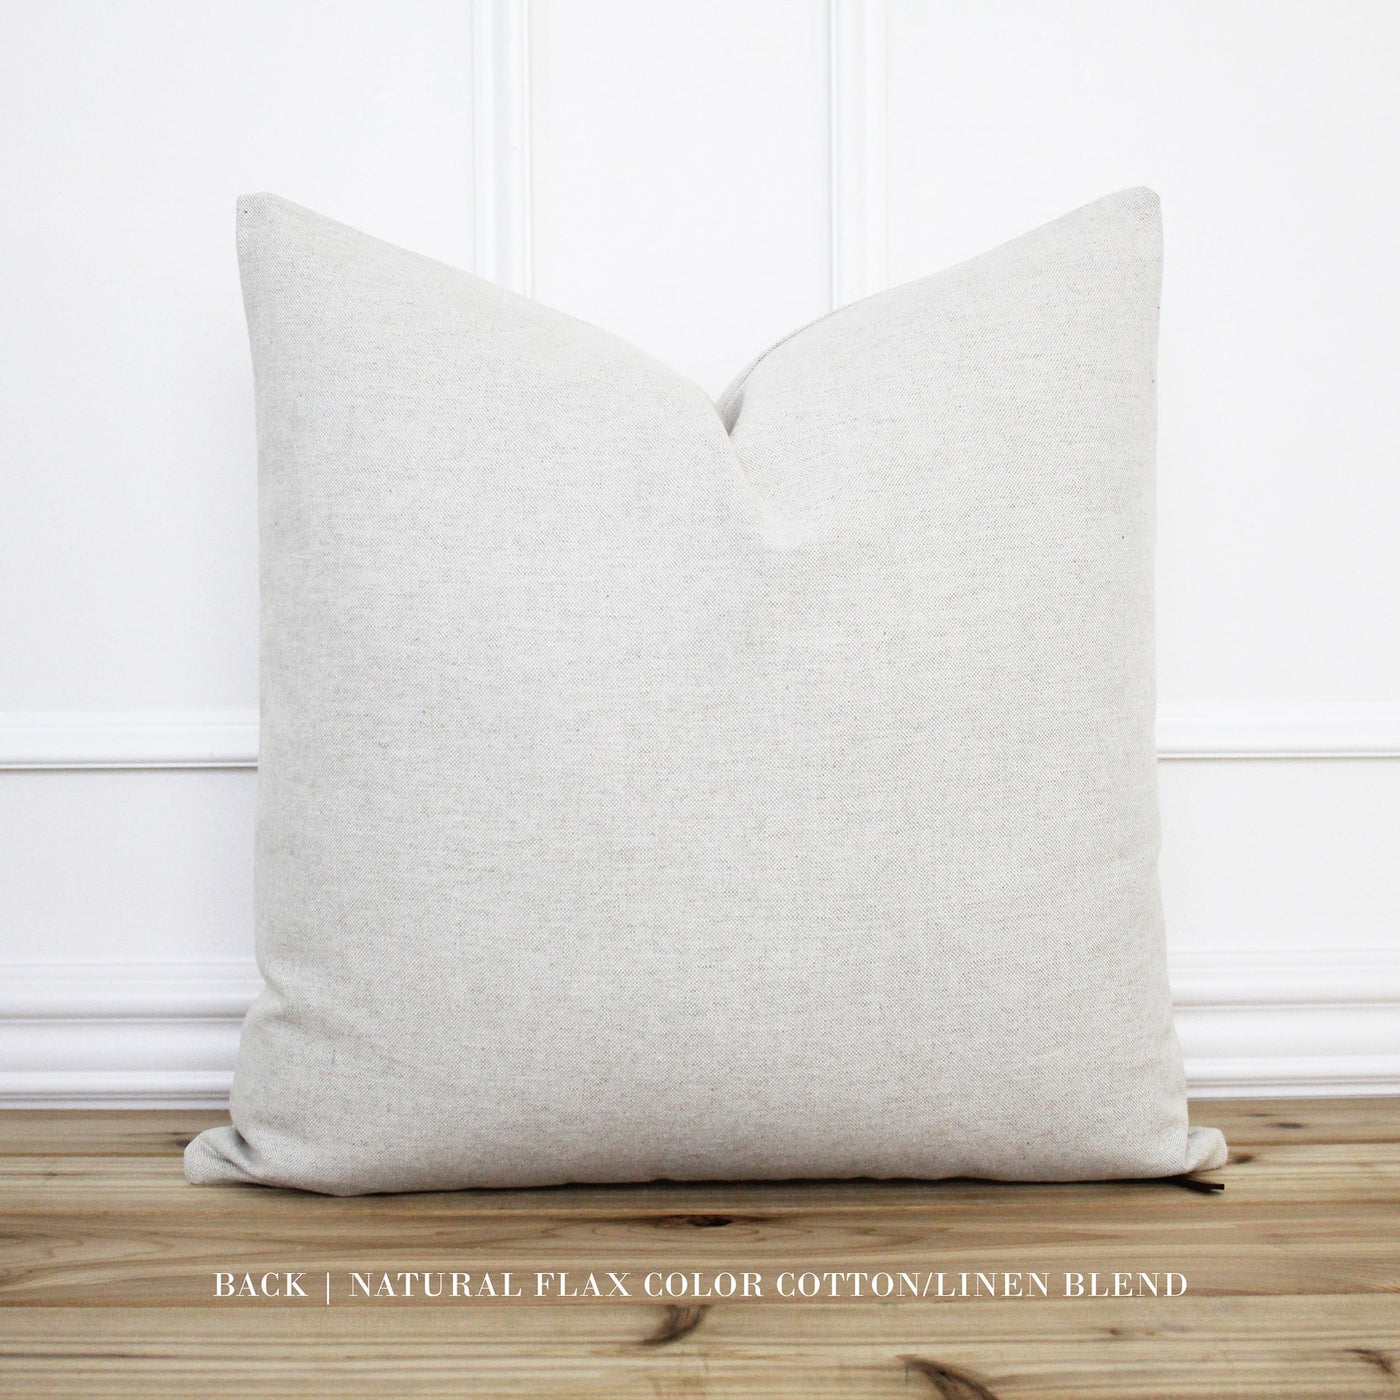 Natural Flax Color at Back of White Herringbone Pillow - Cotton & Linen Blend